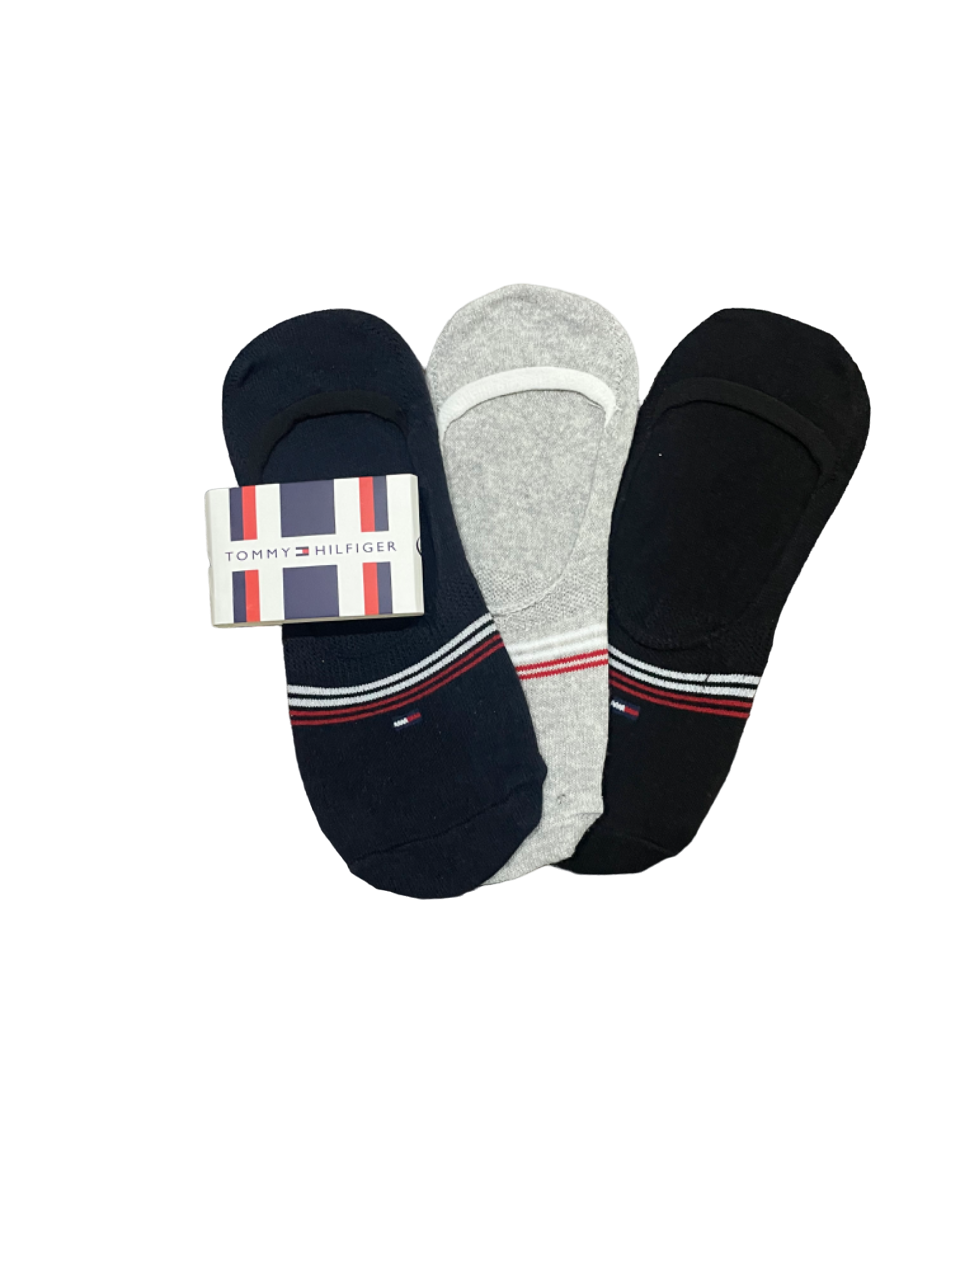 TMS Branded T-o-m-m-y H-i-l-f-i-g-e-r  Inside Socks 6 (Pack Of 3)